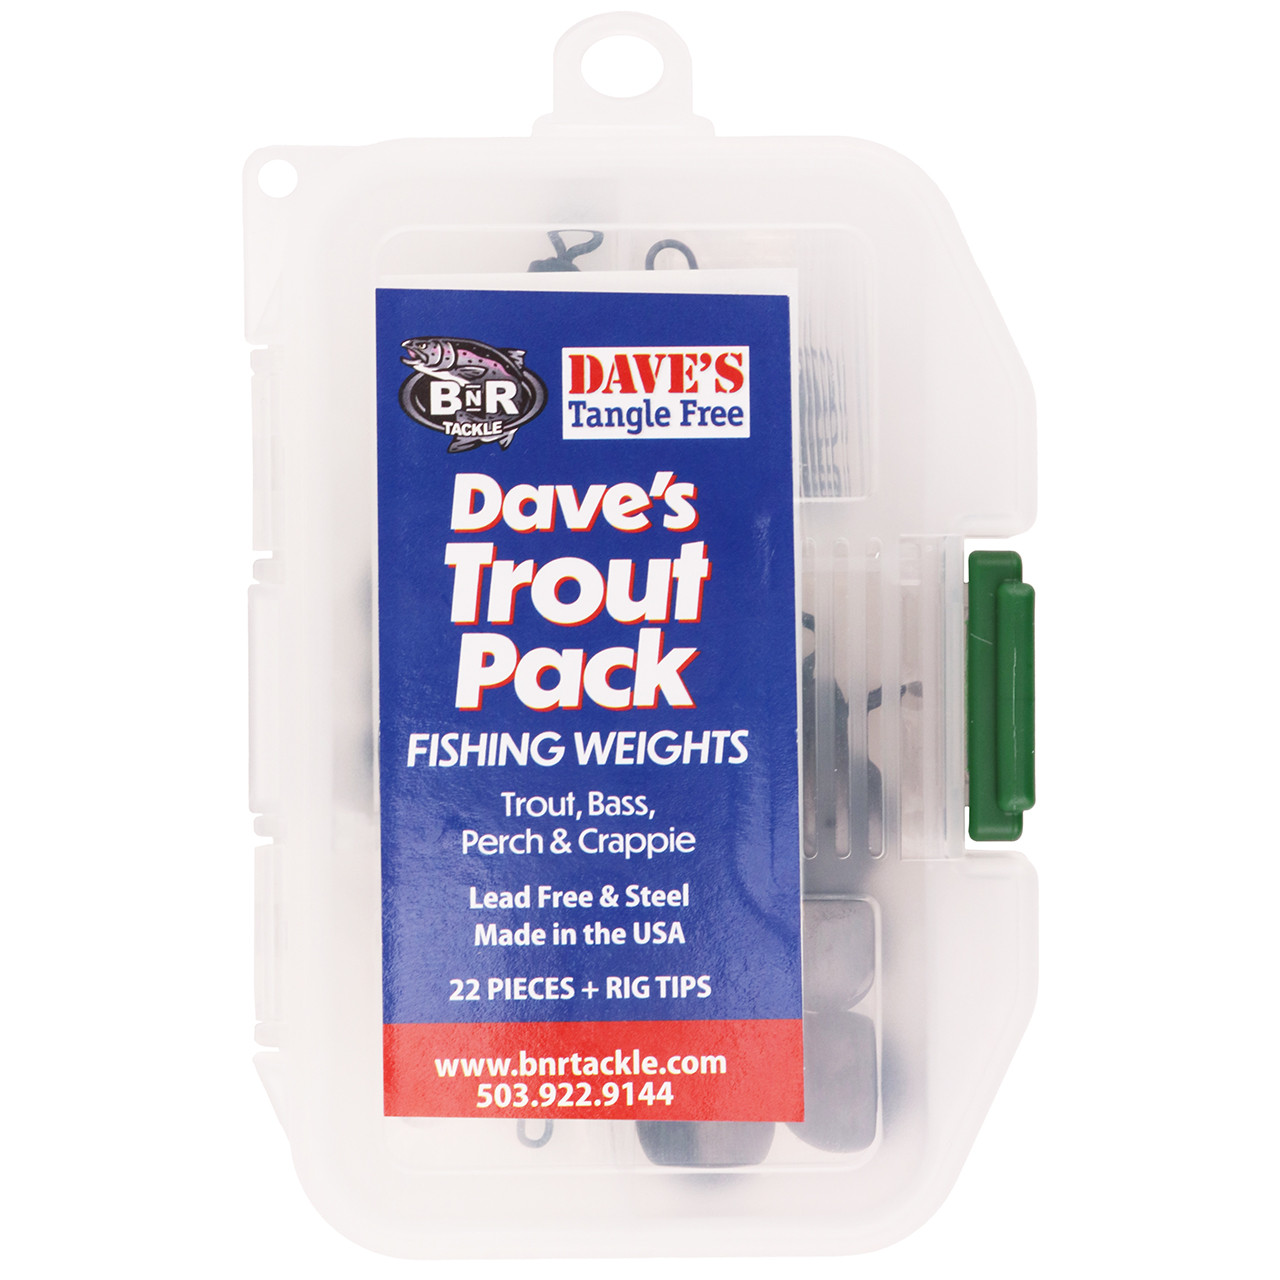 Dave's Tangle Free Trout Pack